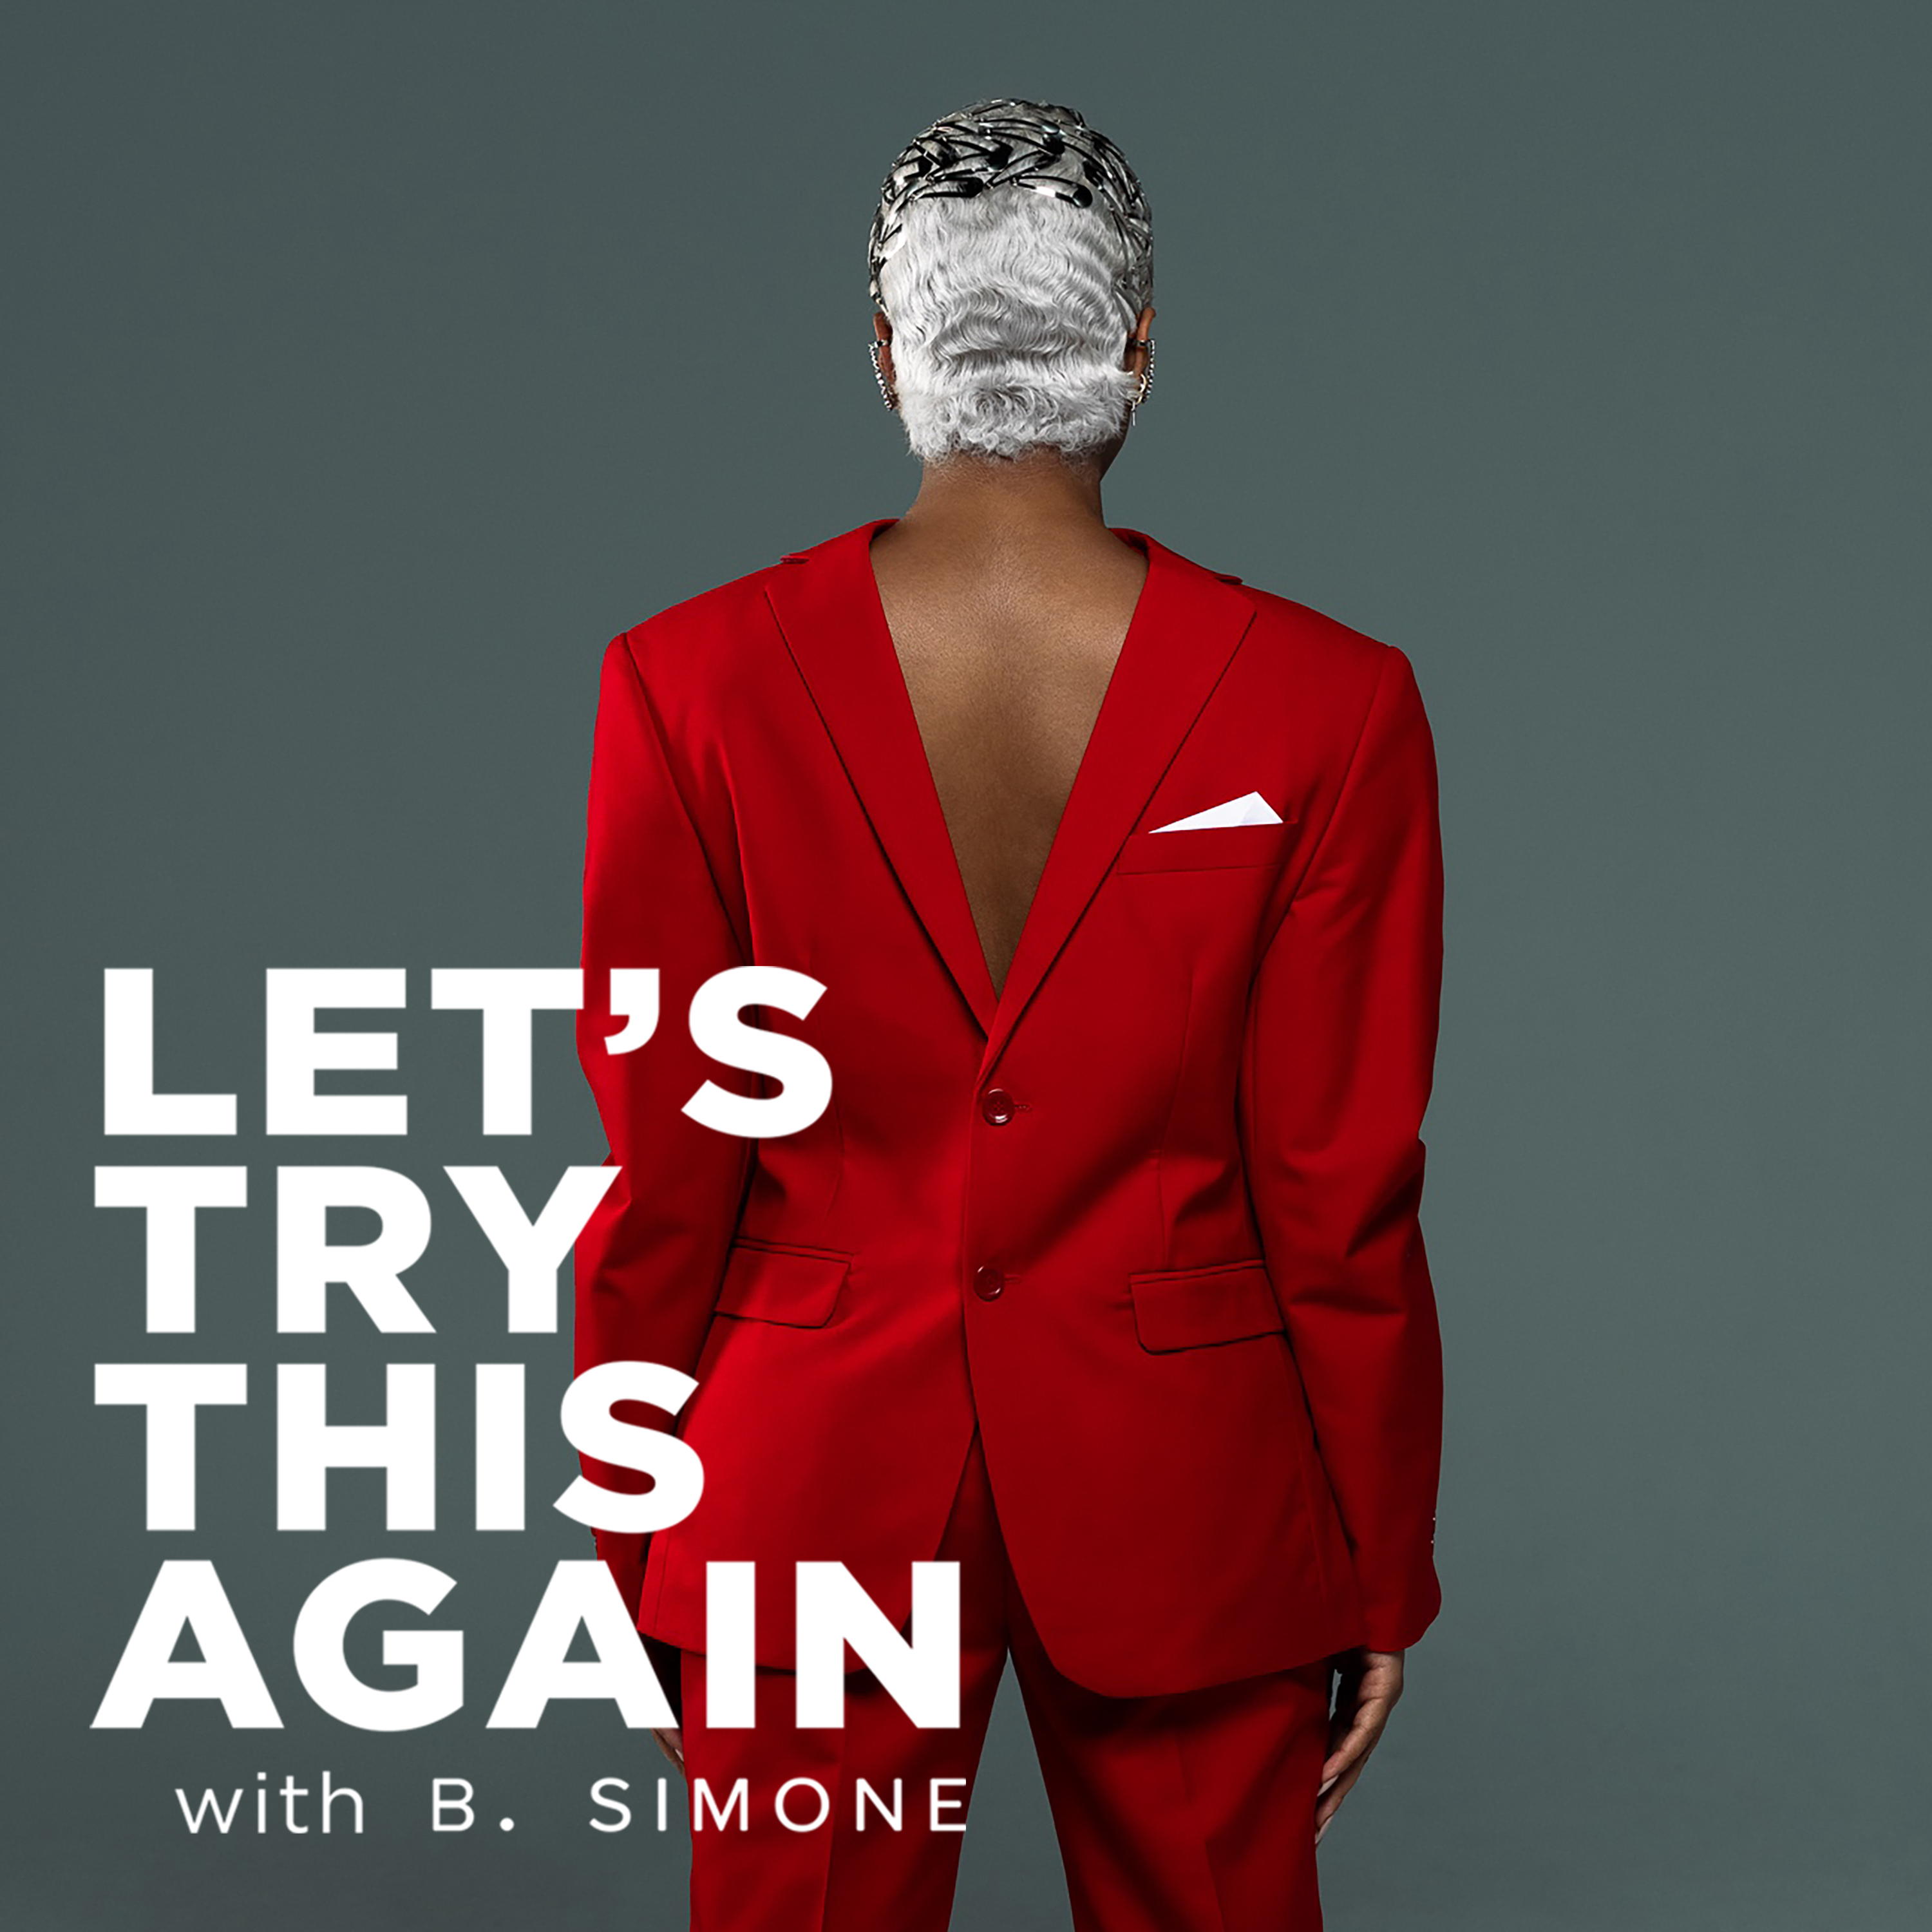 Introducing Let's Try This Again with B. Simone by B. Simone